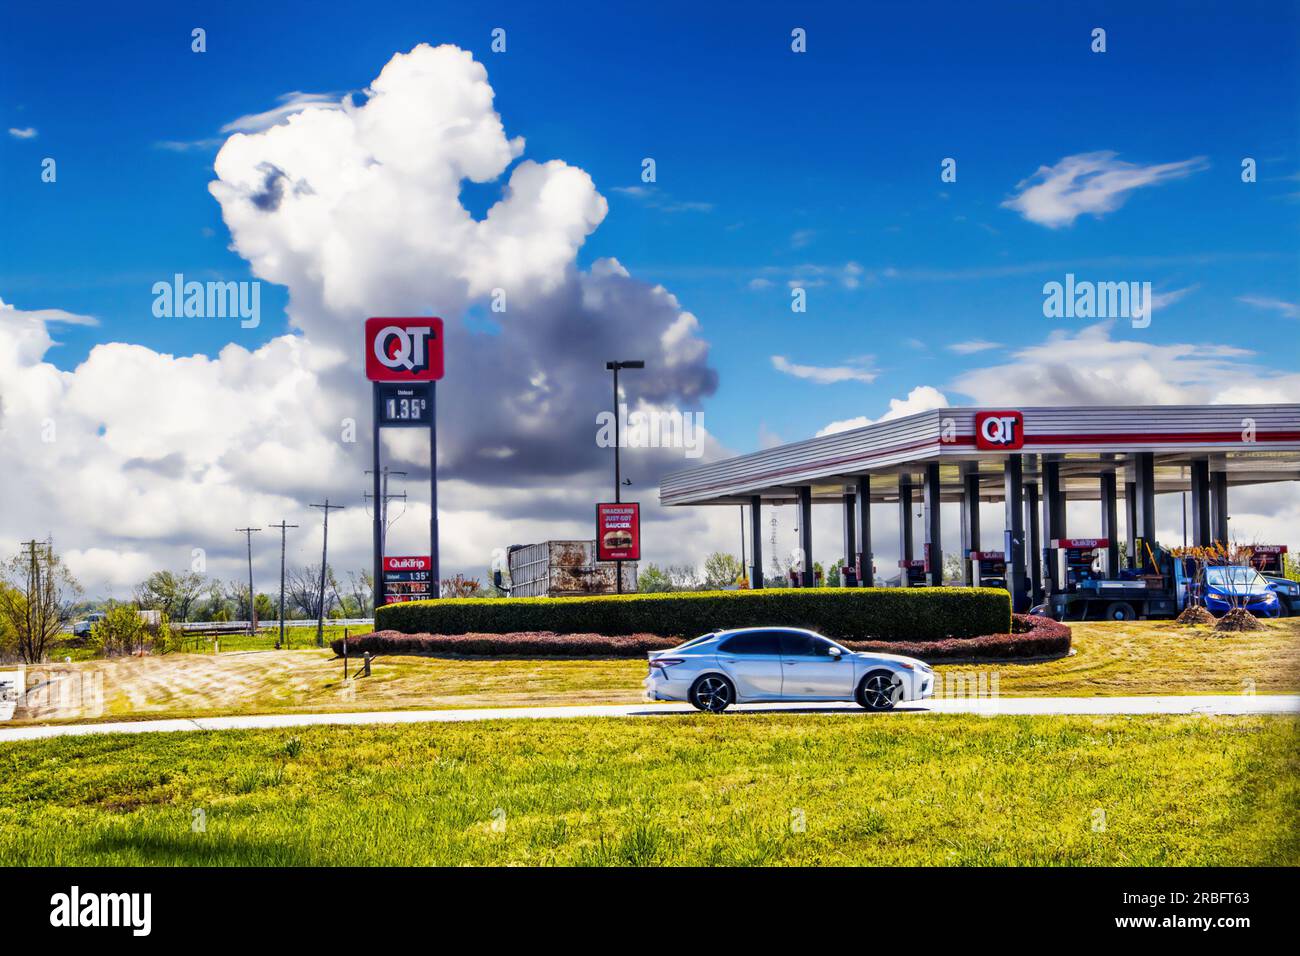 2020 05 14 Tulsa USA Quick Trip Convenience Store and gas station beside highway with semi truck parked and gas and car driving on road Stock Photo